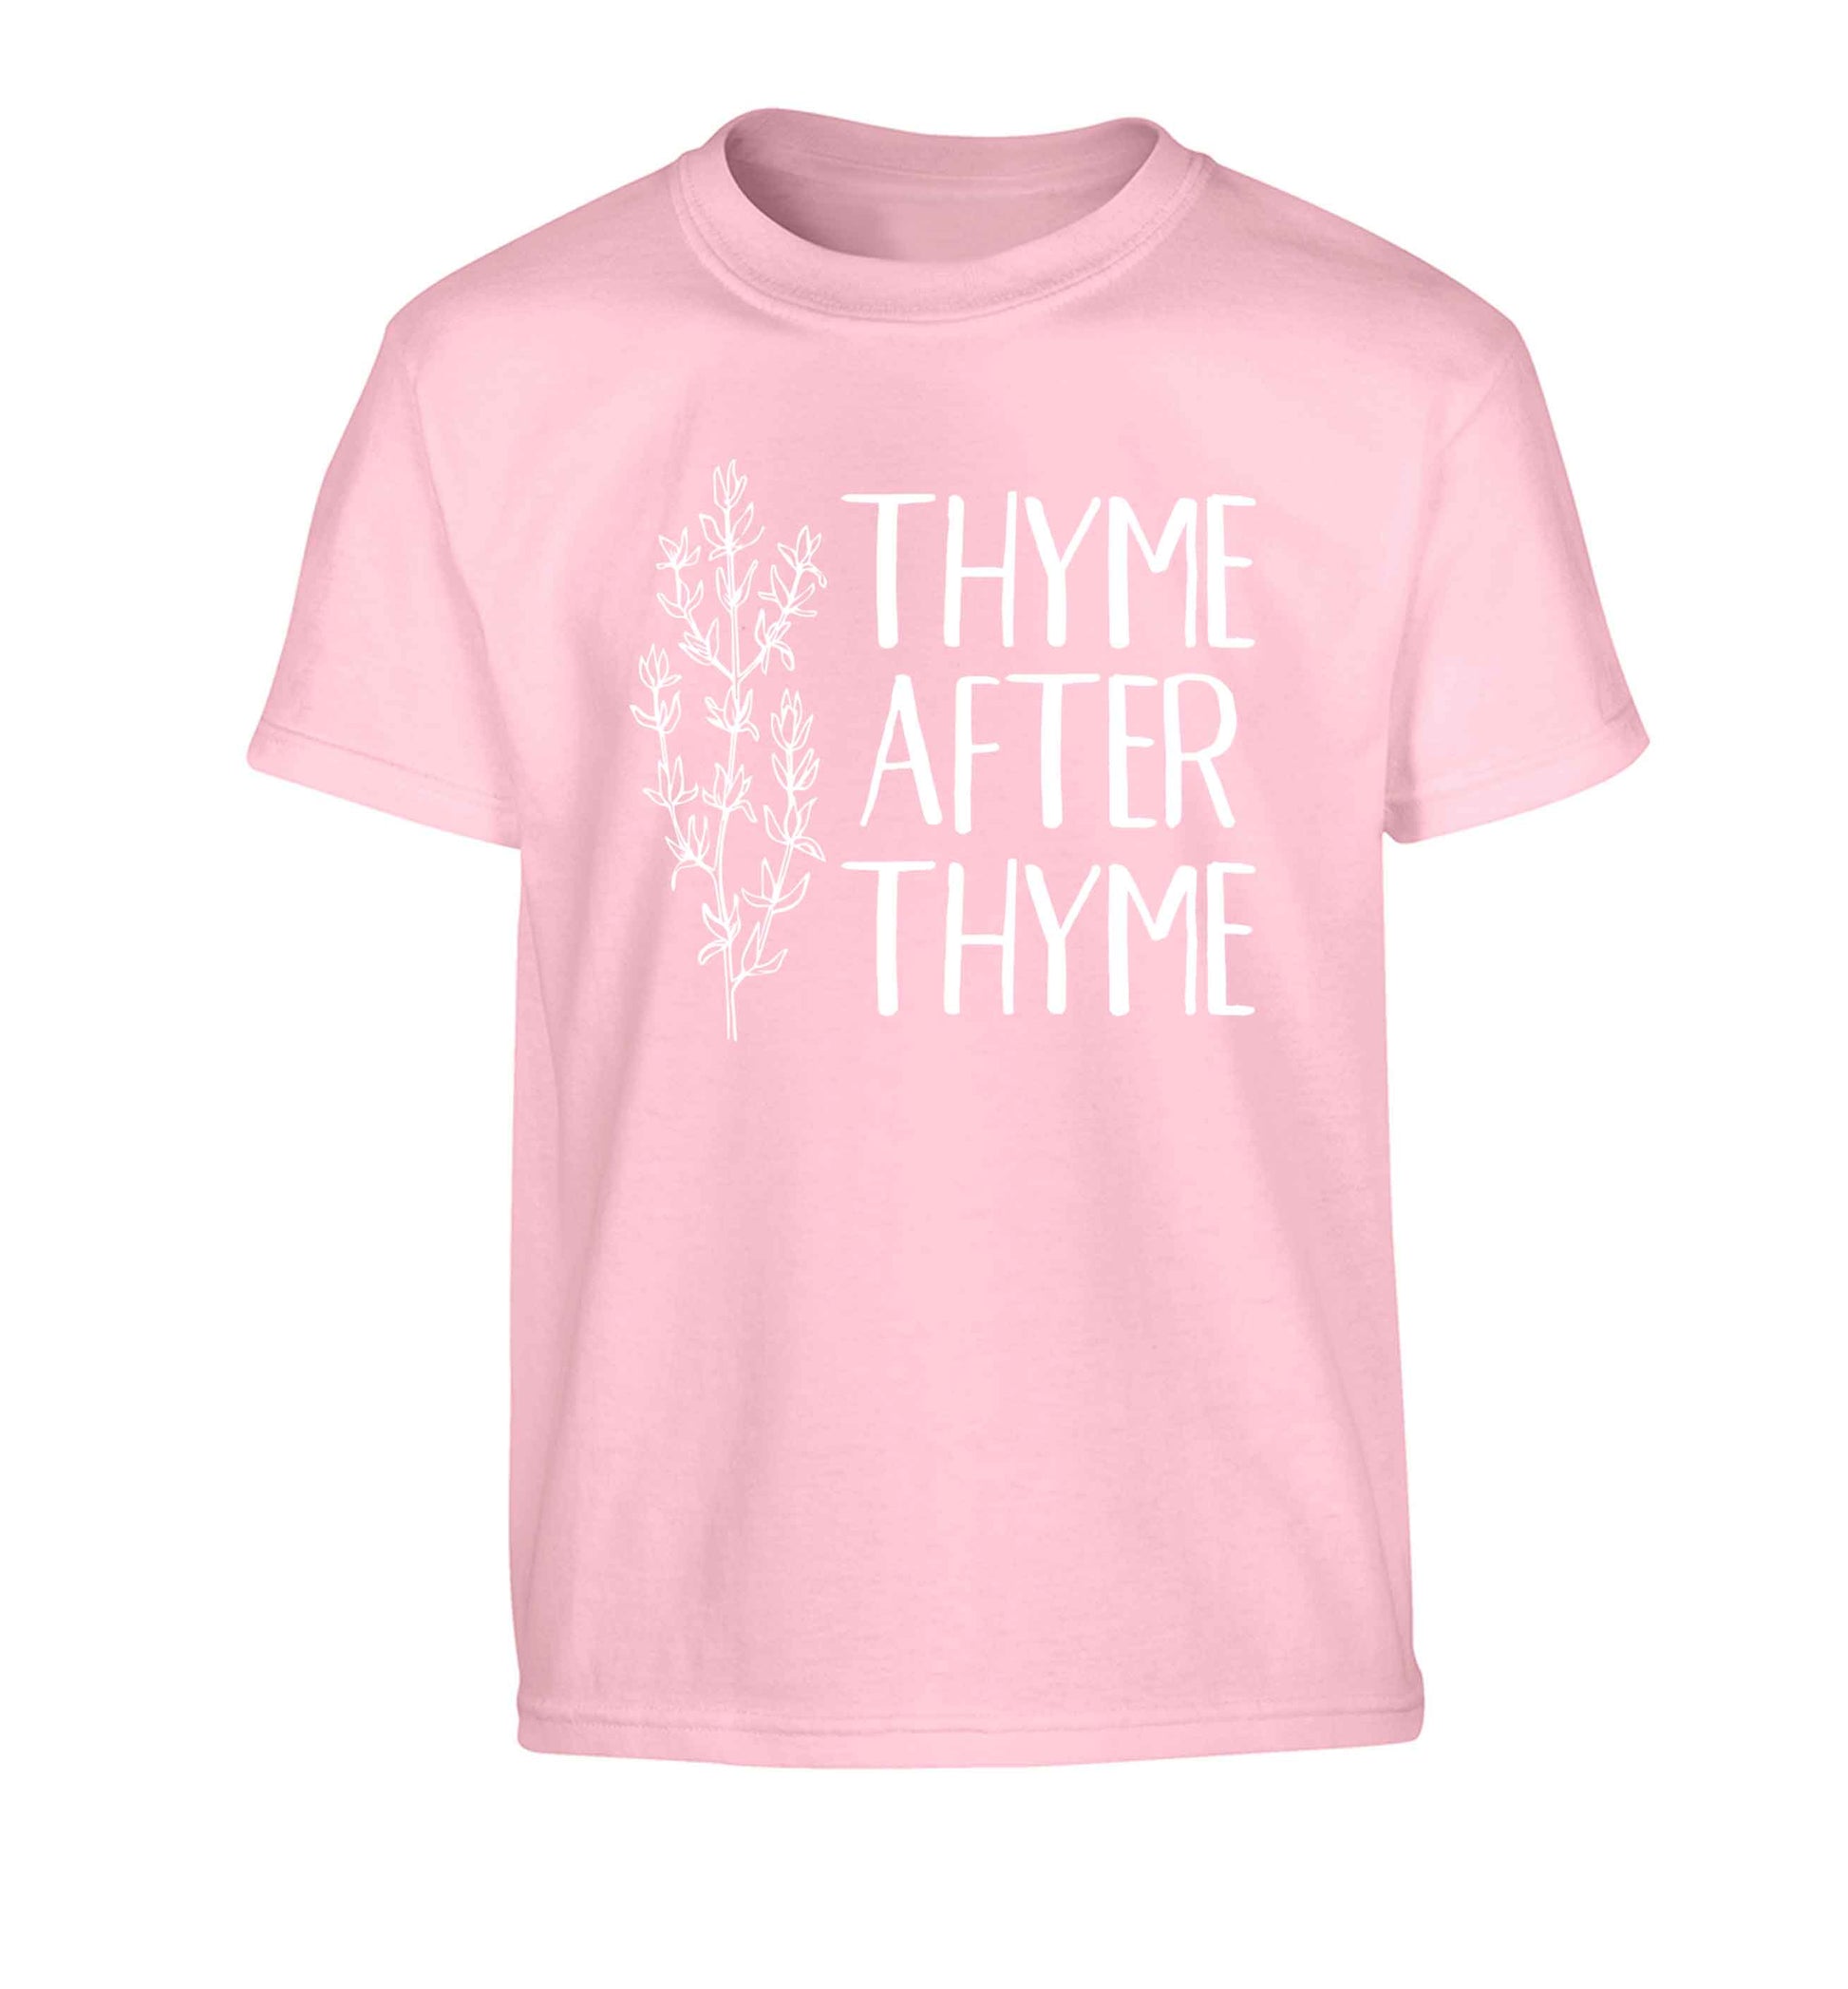 Thyme after thyme Children's light pink Tshirt 12-13 Years